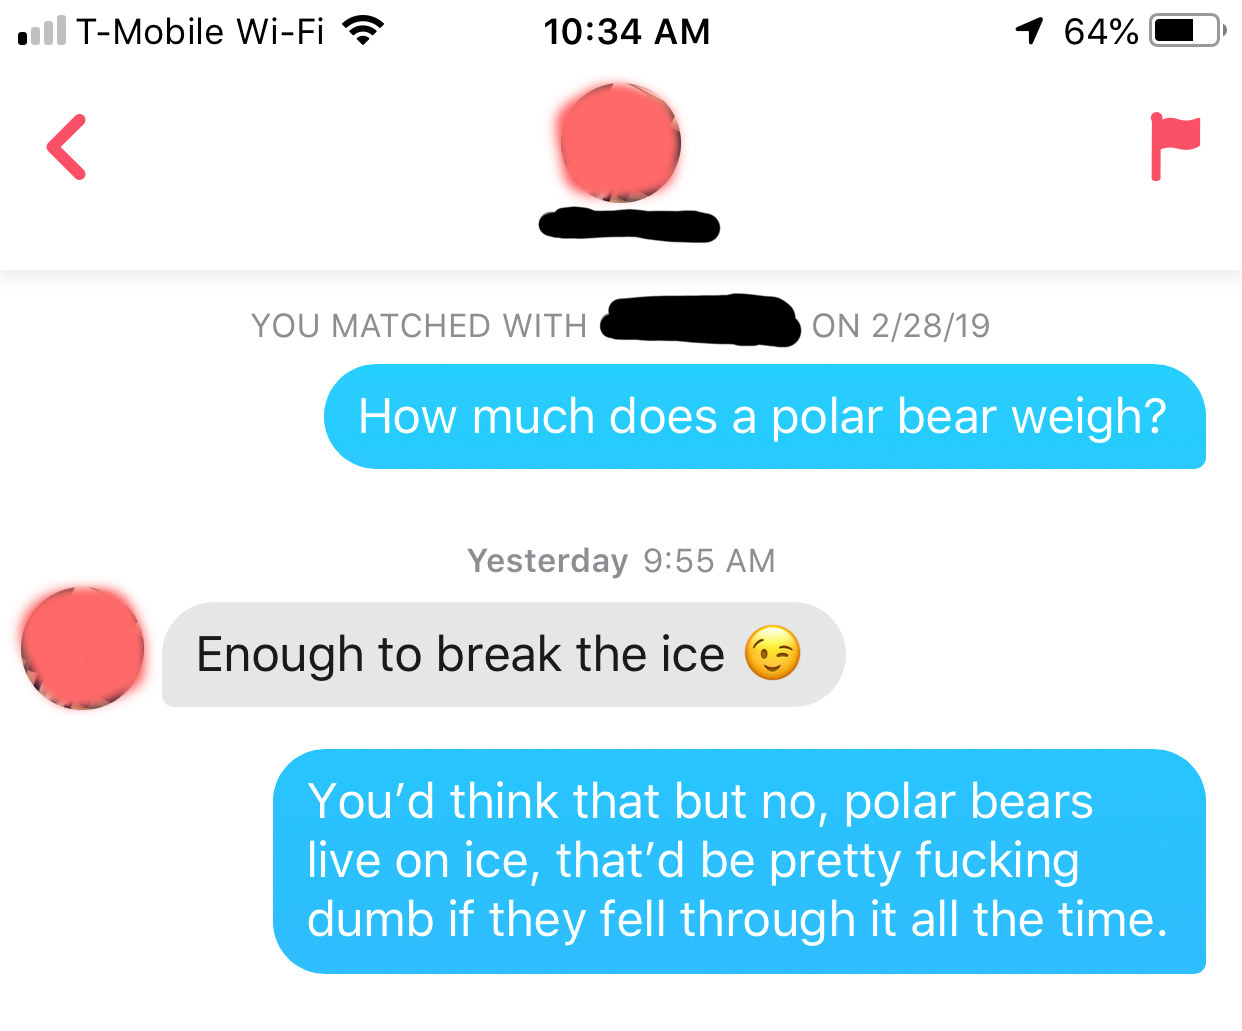 person butchering the &quot;polar bear weighs enough to break the ice&quot; line